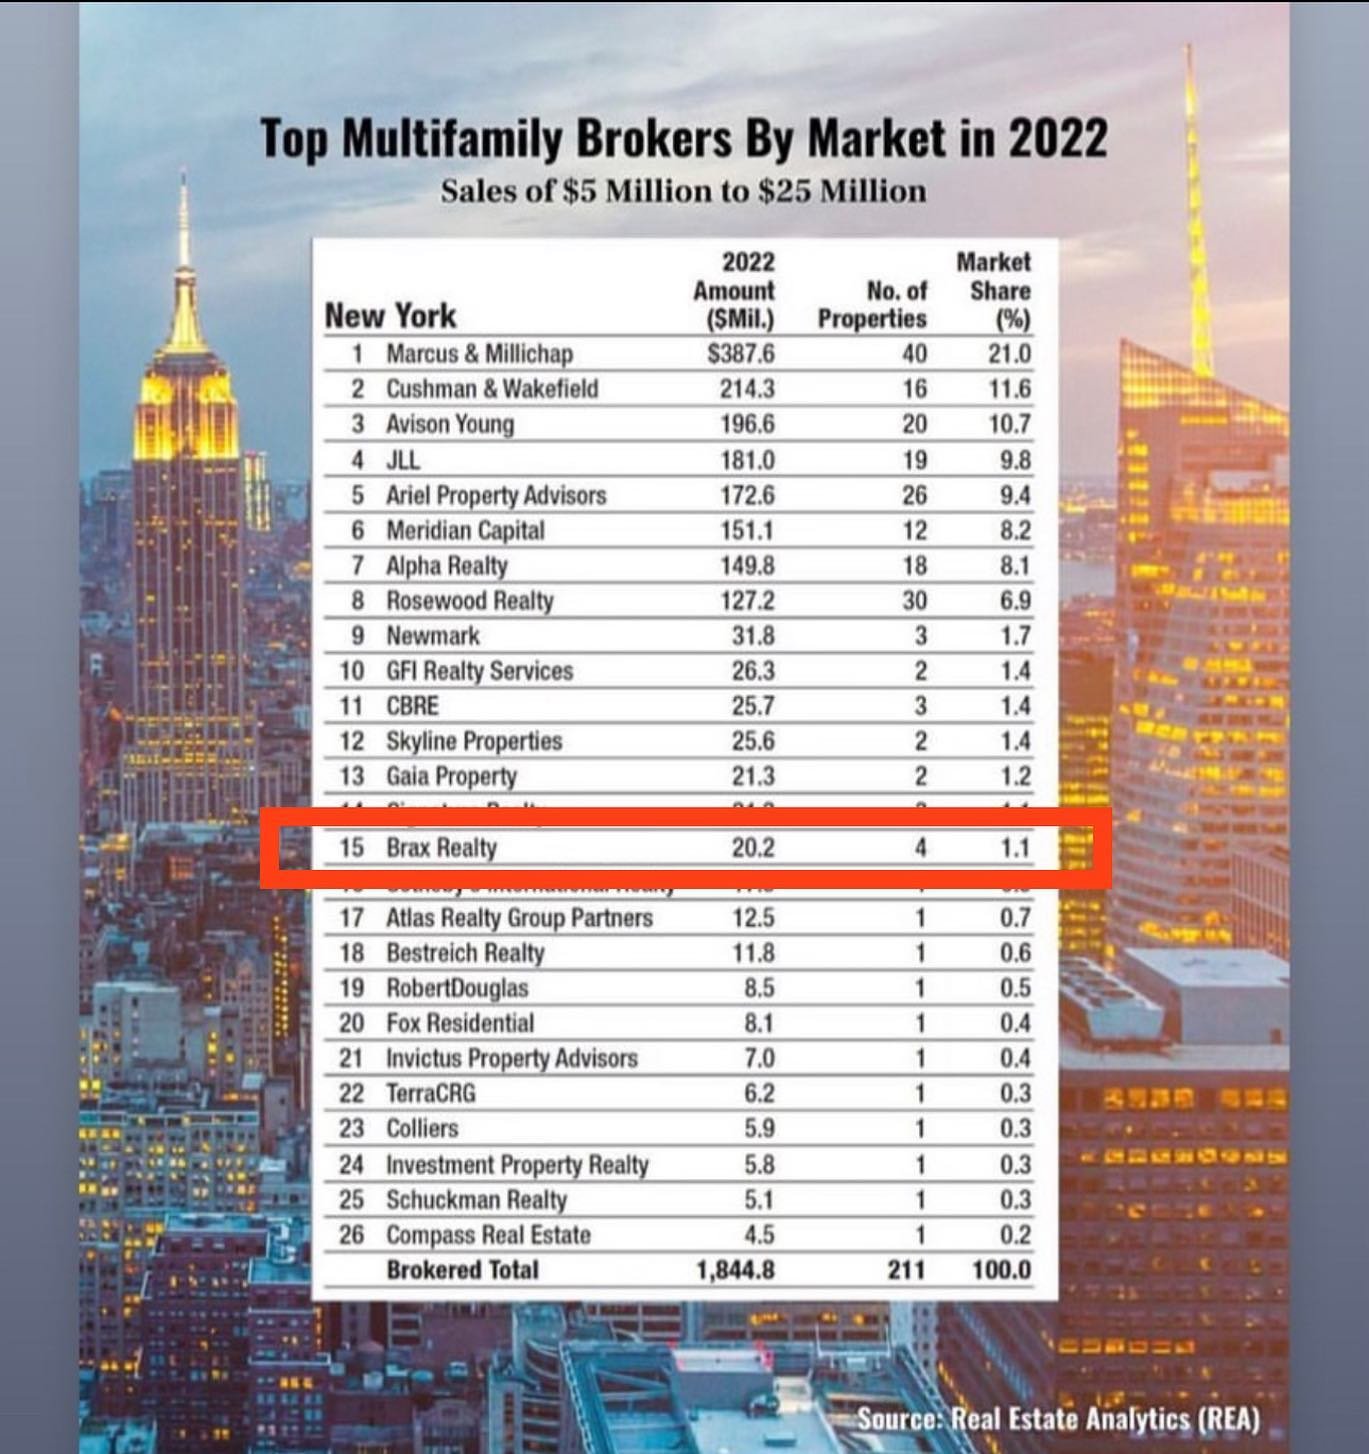 We were recognized by Real Estate Analytics as top 15 multi-family brokers in NY for 2022!

#braxrealty #keepclimbing